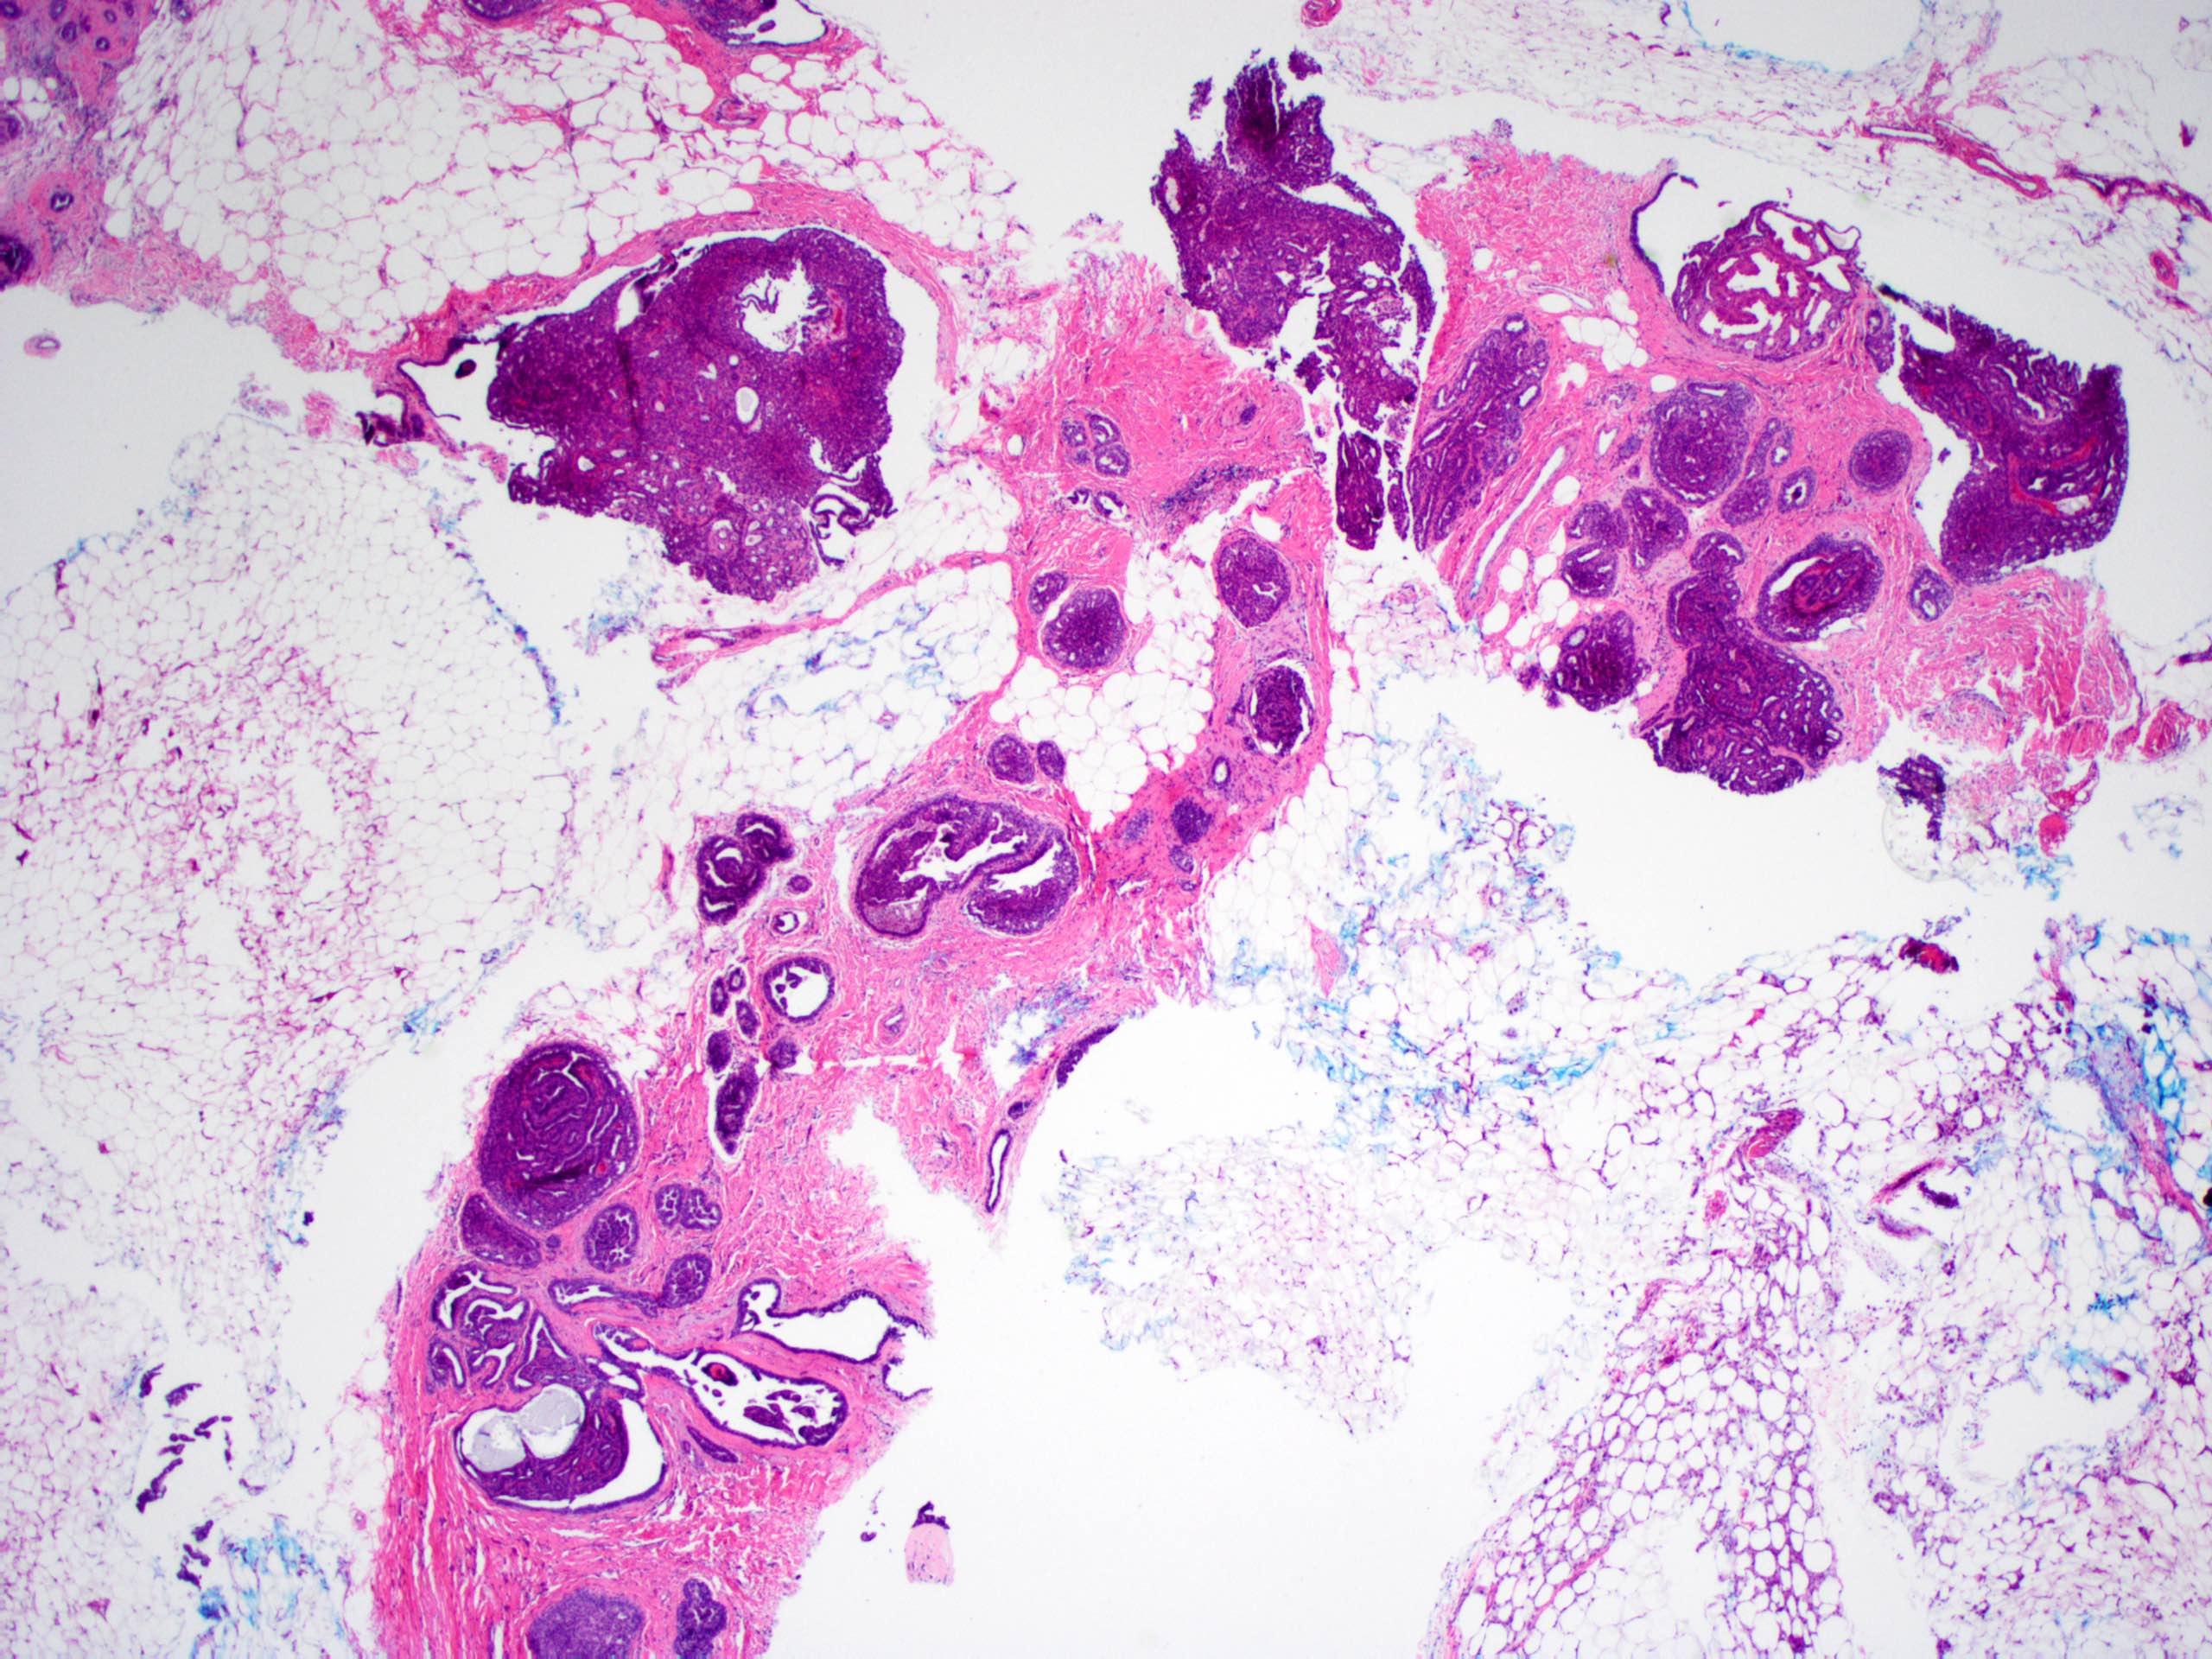 intraductal papilloma pathology outlines)